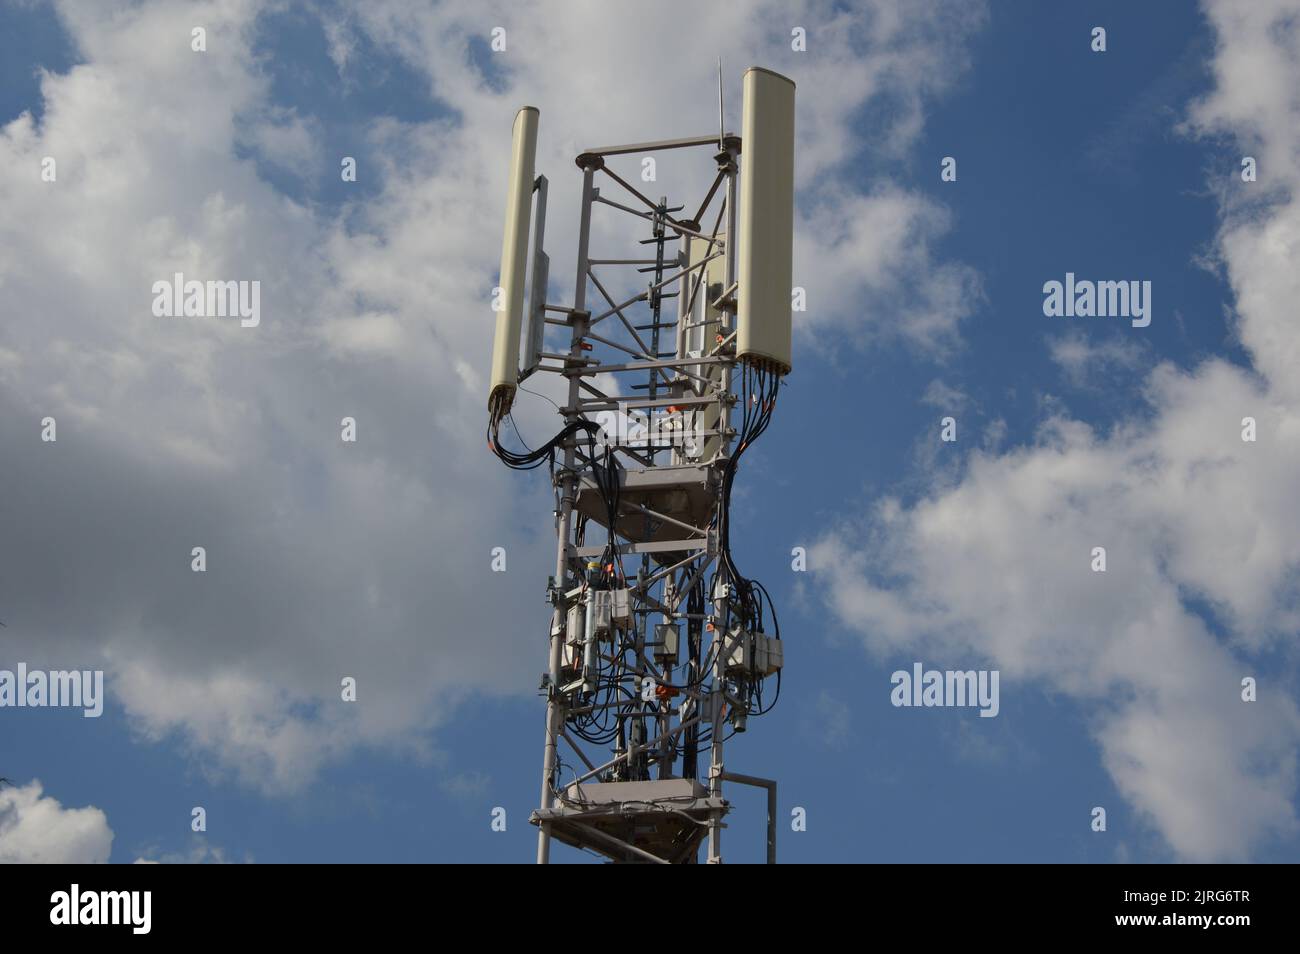 A Telecommunication antenna mast with a slightly cloudy background, France Stock Photo